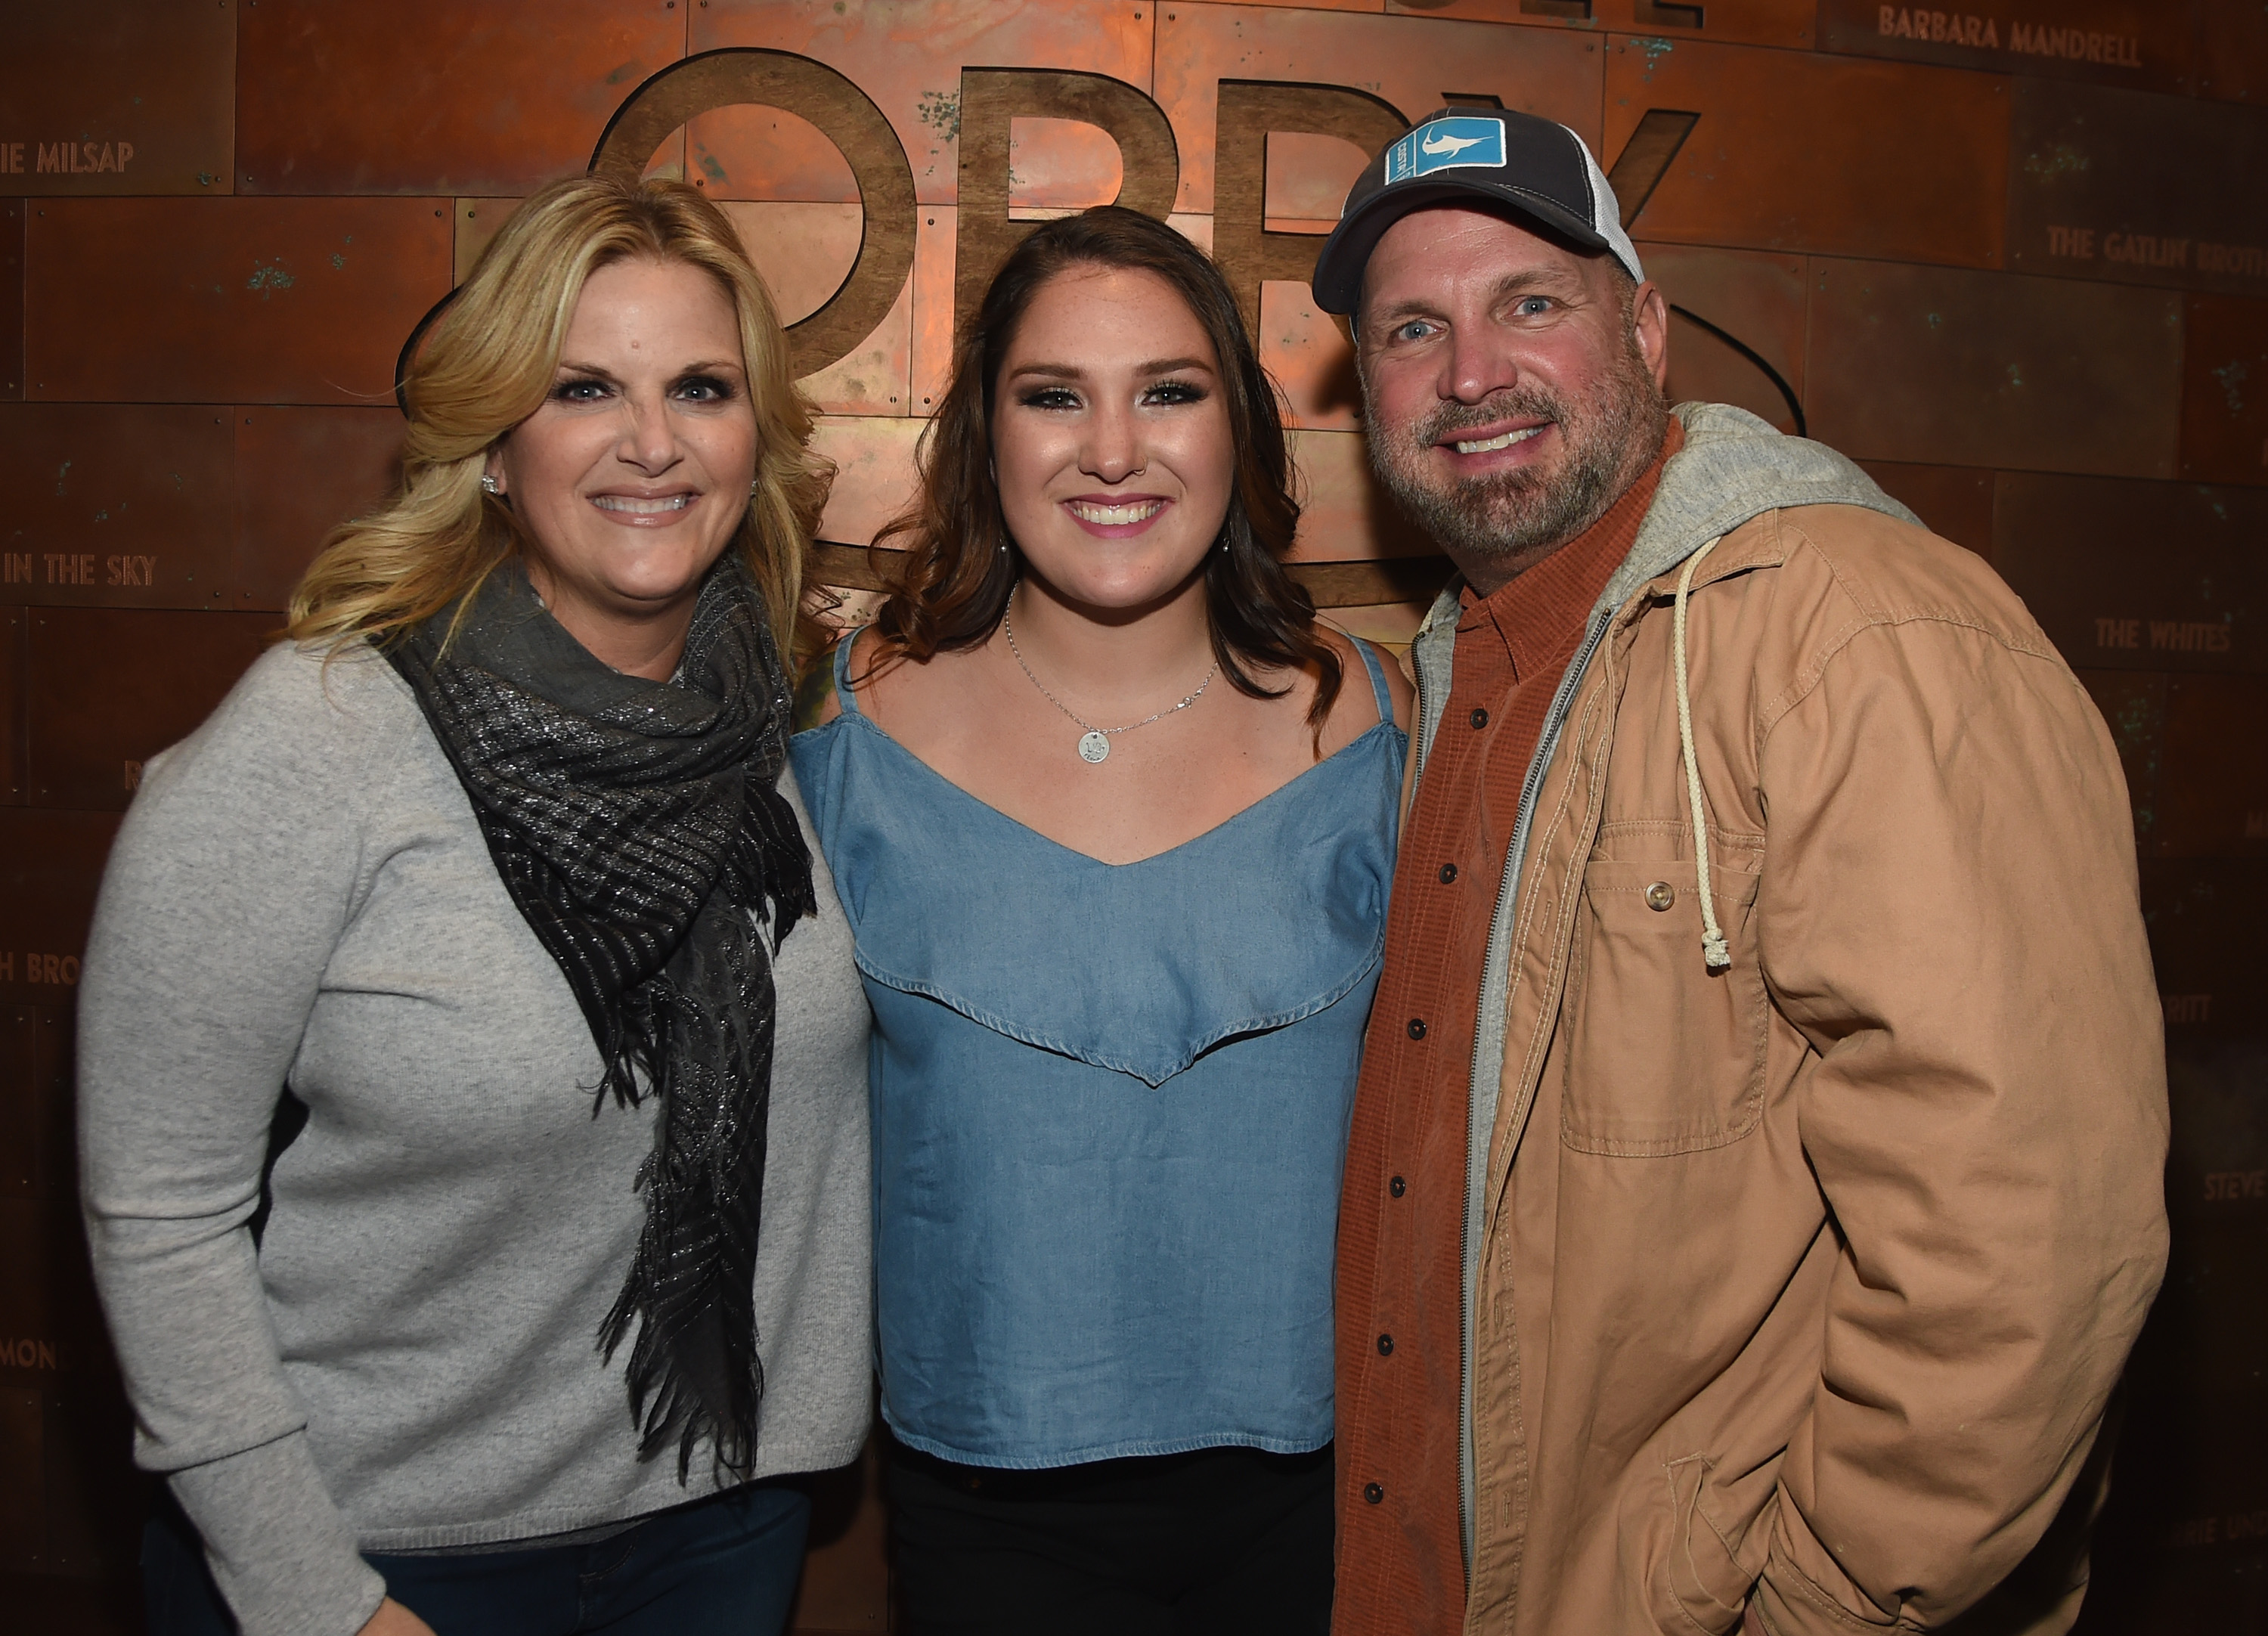 Trisha Yearwood, Allie Colleen Brooks, and Garth Brooks after Allie's Grand Ole Opry debut on October 19, 2017, in Nashville, Tennessee. | Source: Getty Images